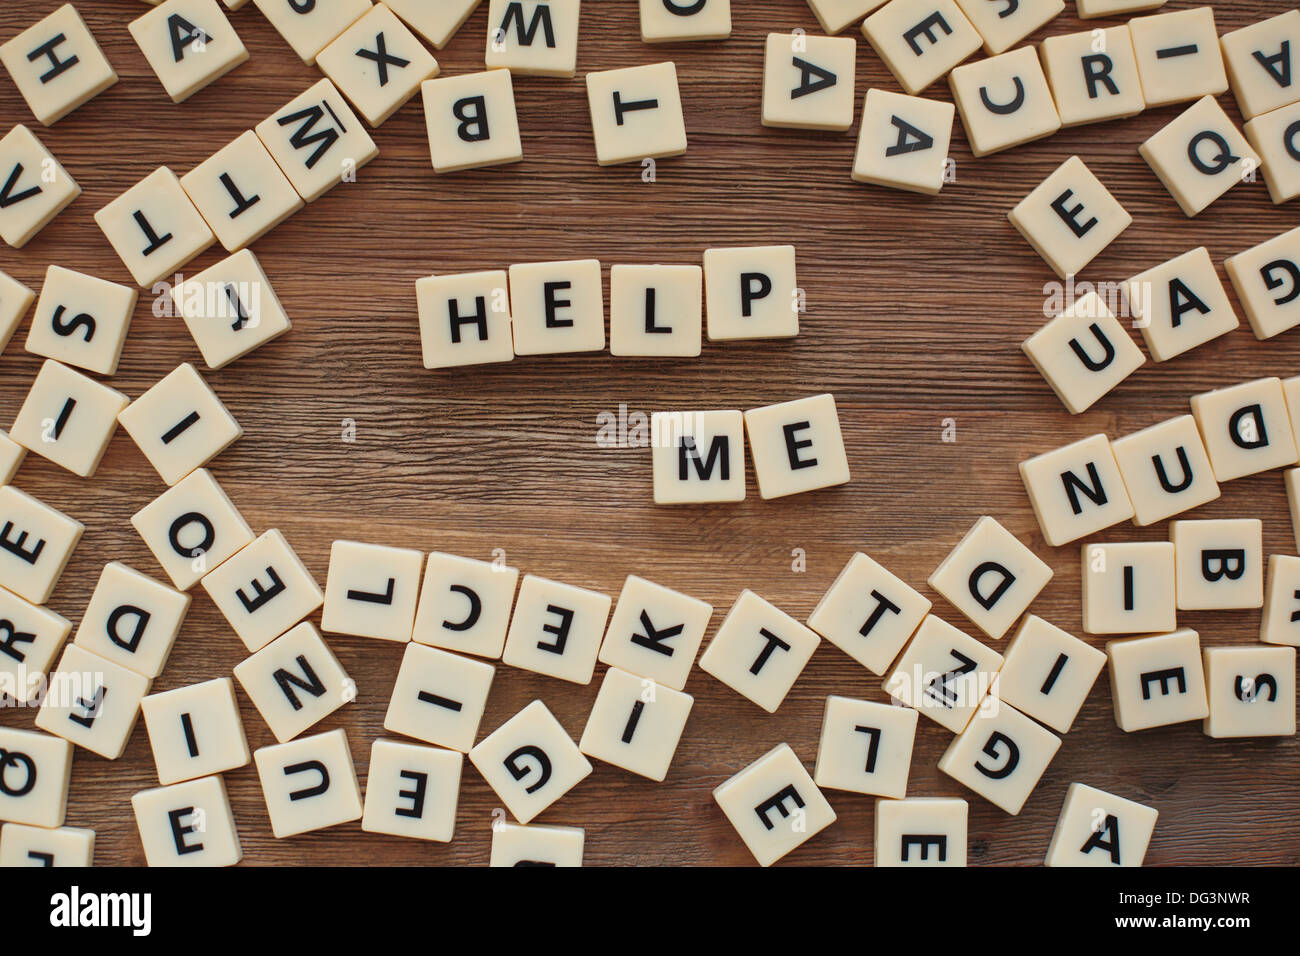 Plastic letters from a childrens' spelling game on a wooden table spell  "help me" Stock Photo